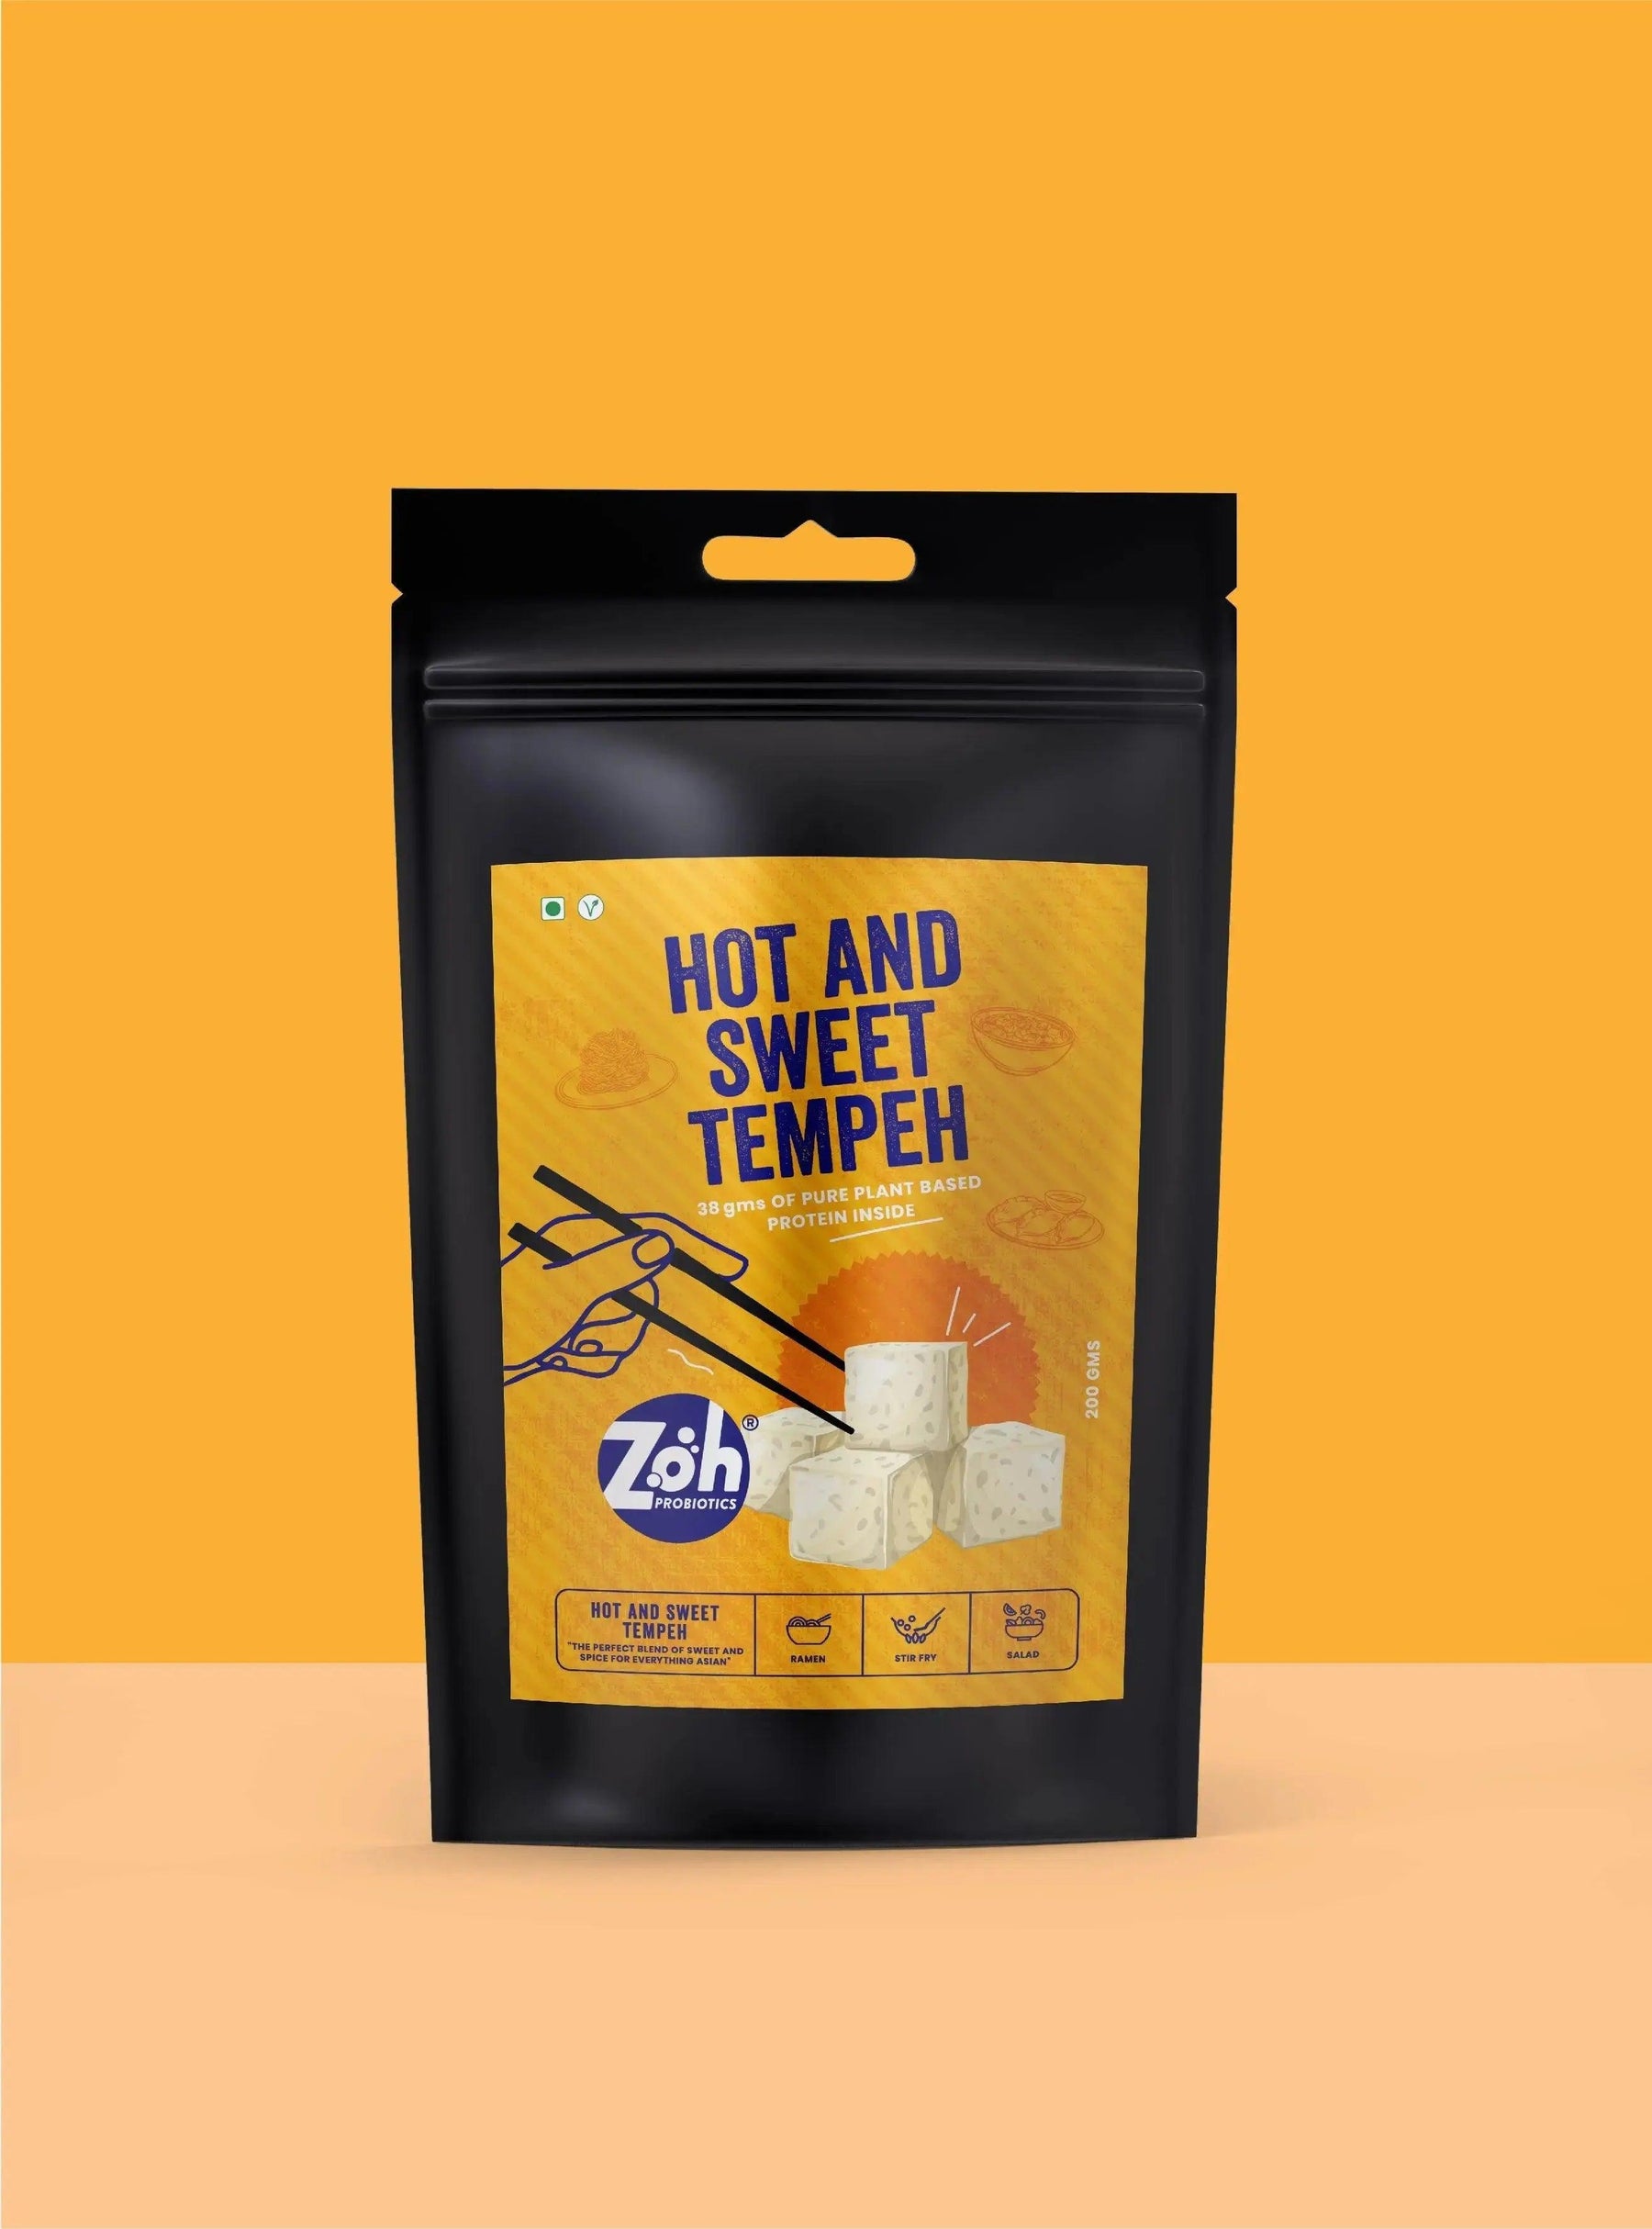 Bulk tempeh Mumbai: Coloured background mock-up of Zoh Hot and Sweet front packaging